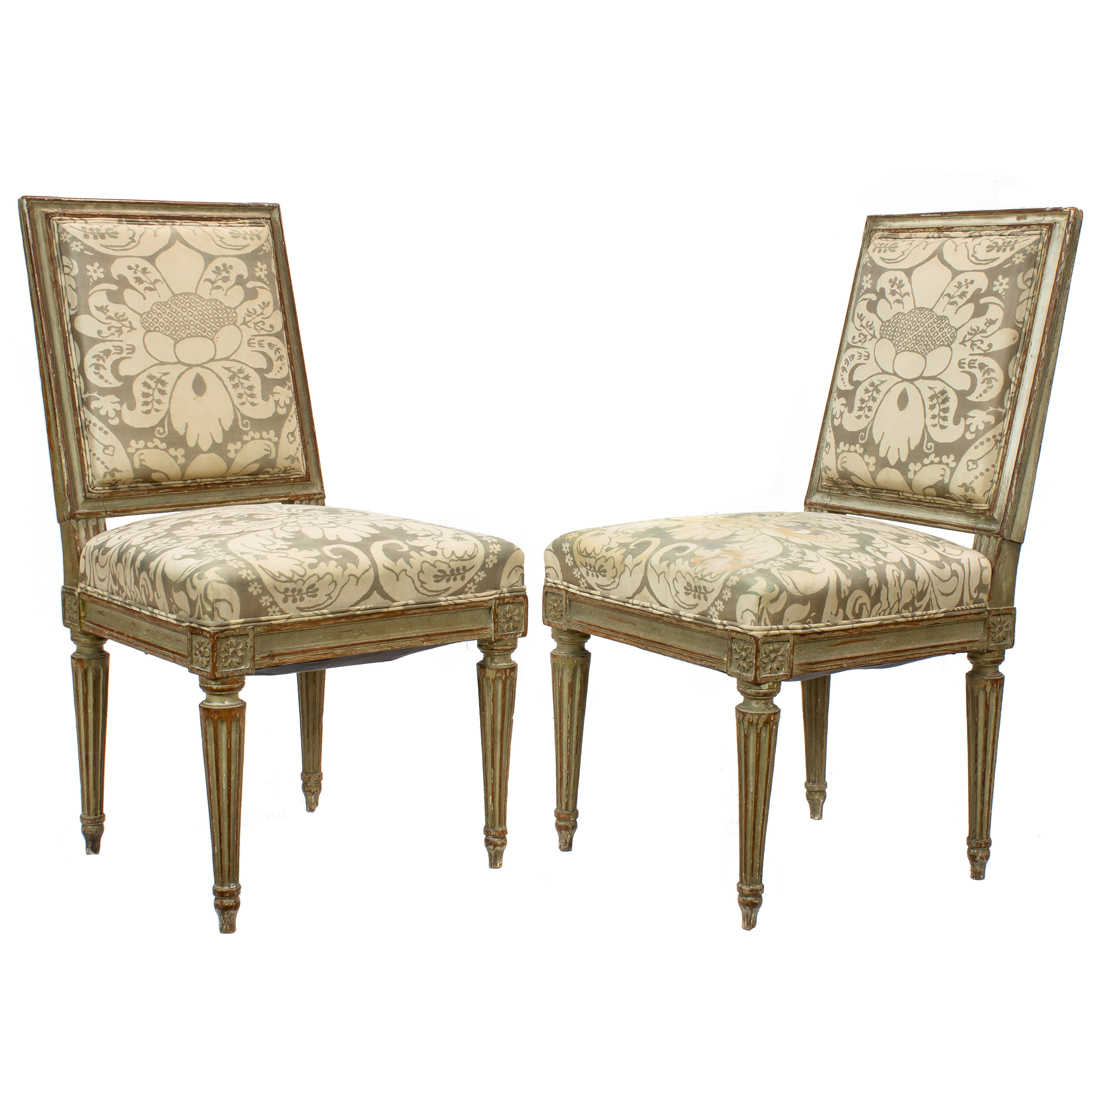 A PAIR OF FRENCH NEOCLASSICAL STYLE